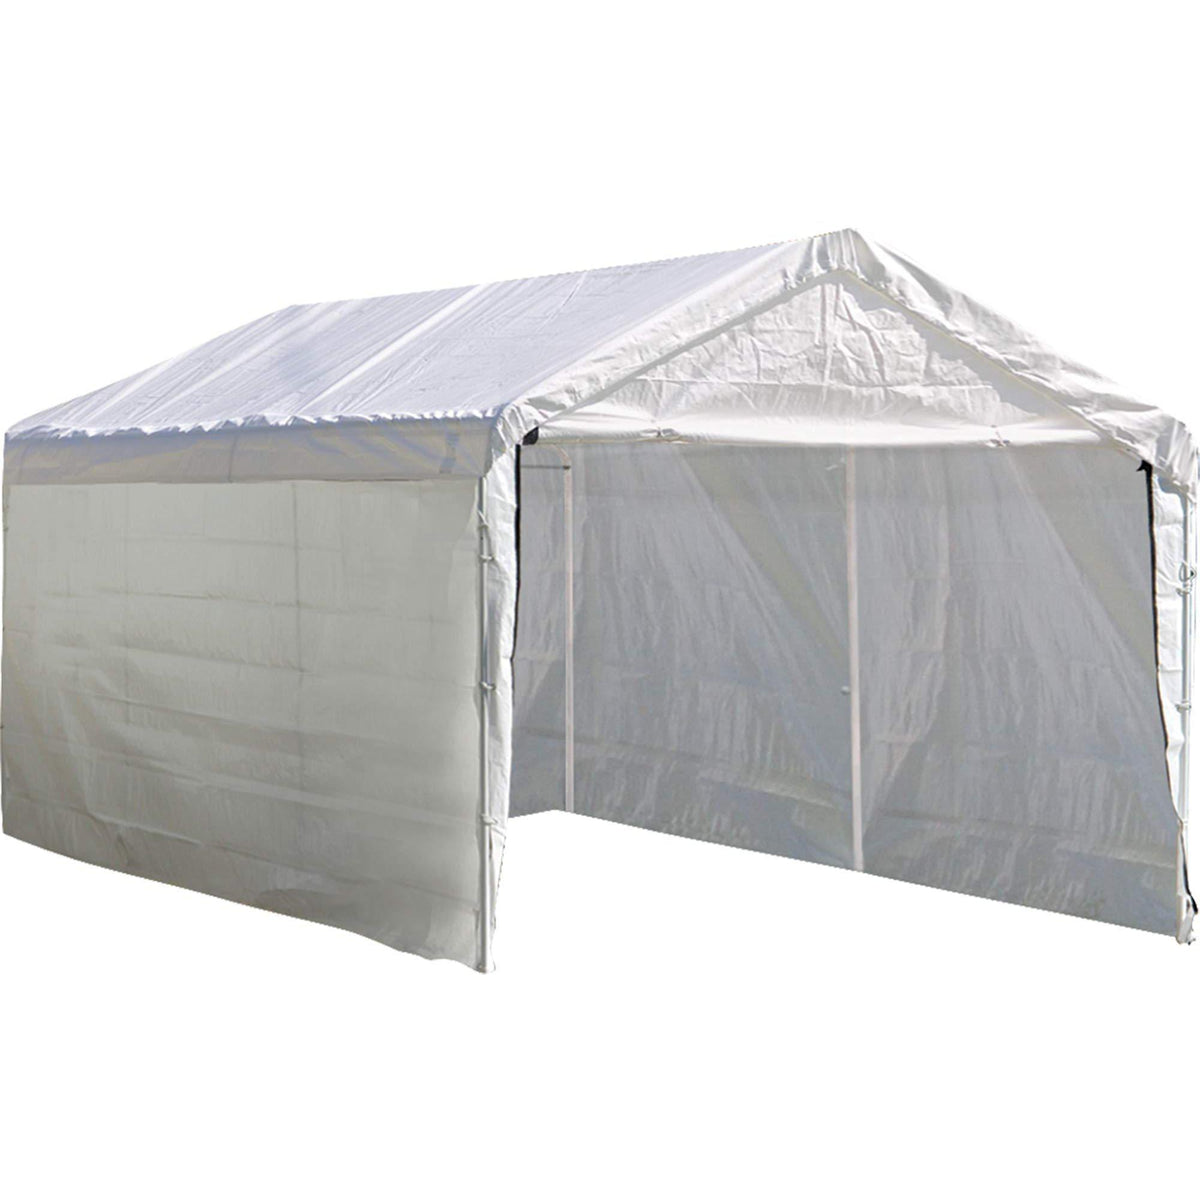 ShelterLogic Super Max 12 ft. x 20 ft. White Canopy Enclosure Kit, Canopy and Frame Sold Separately